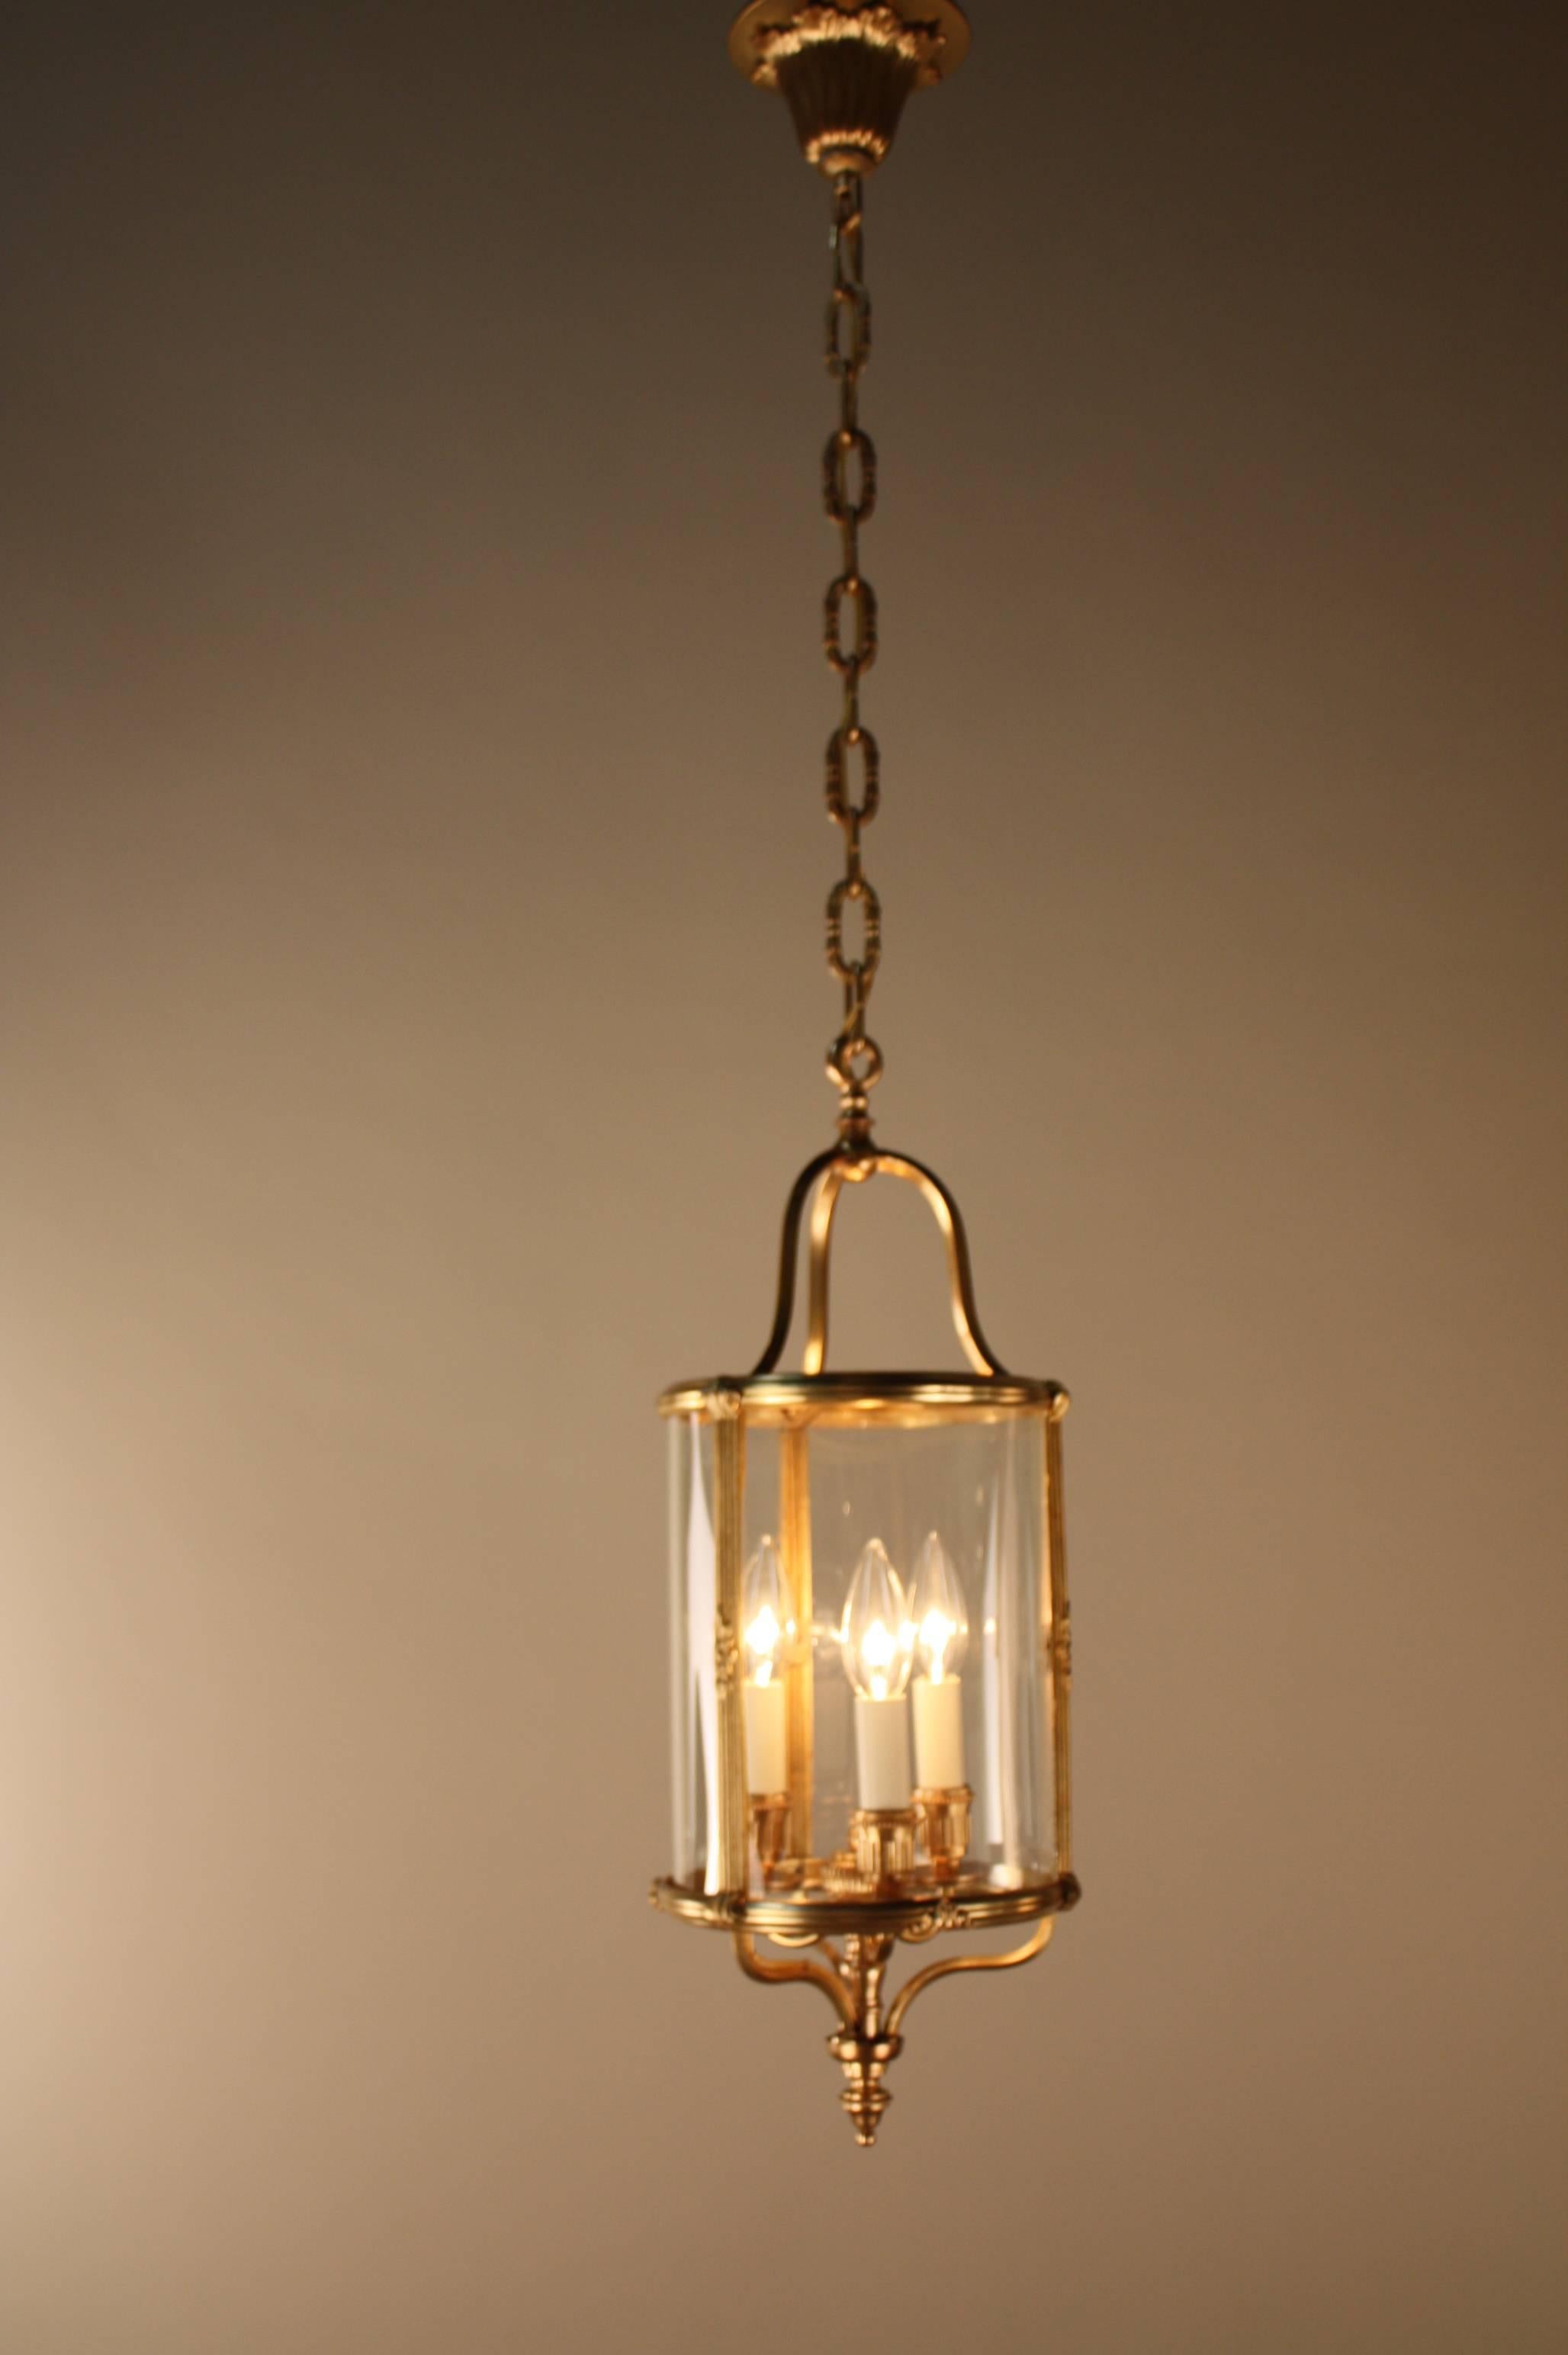 Elegant pair of three-light French bronze with bent glass lanterns by Atelier Petitot.